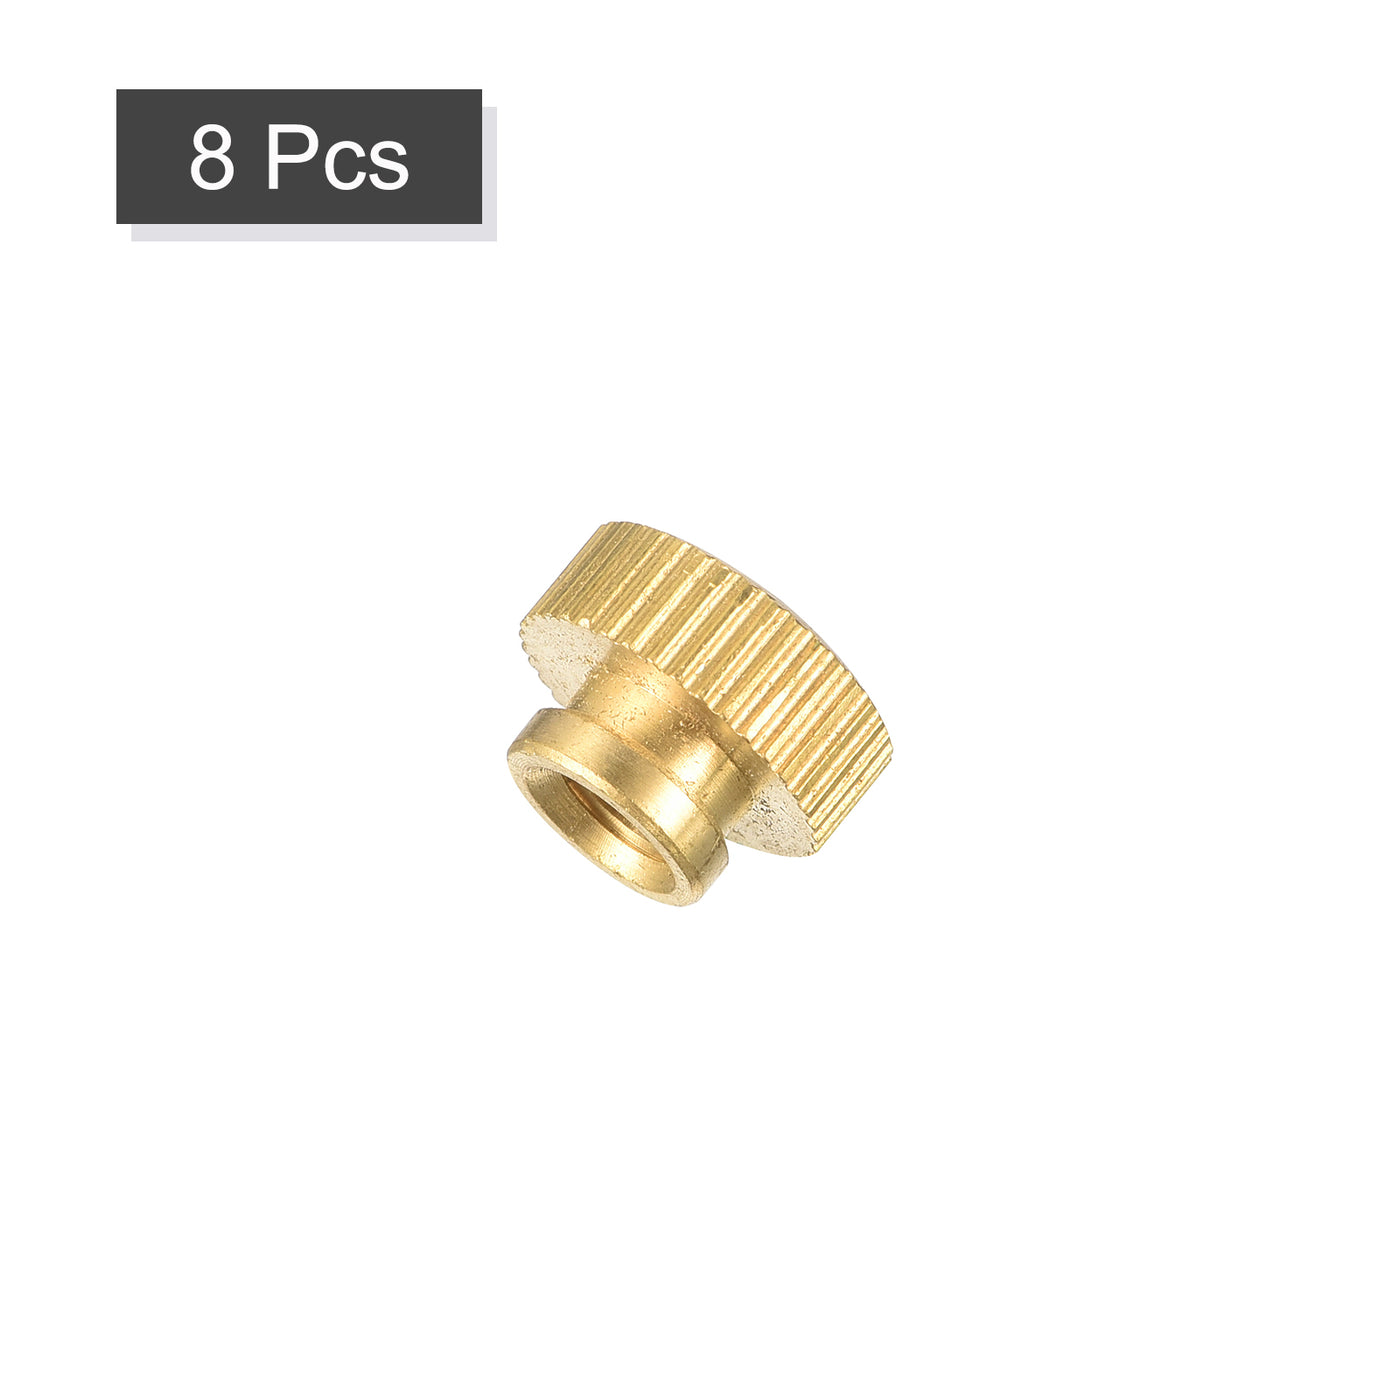 uxcell Uxcell Brass Knurled Thumb Nuts, M5x0.8mm Round Stepped Knobs Fasteners for 3D Printer, Electronic Equipment 8Pcs